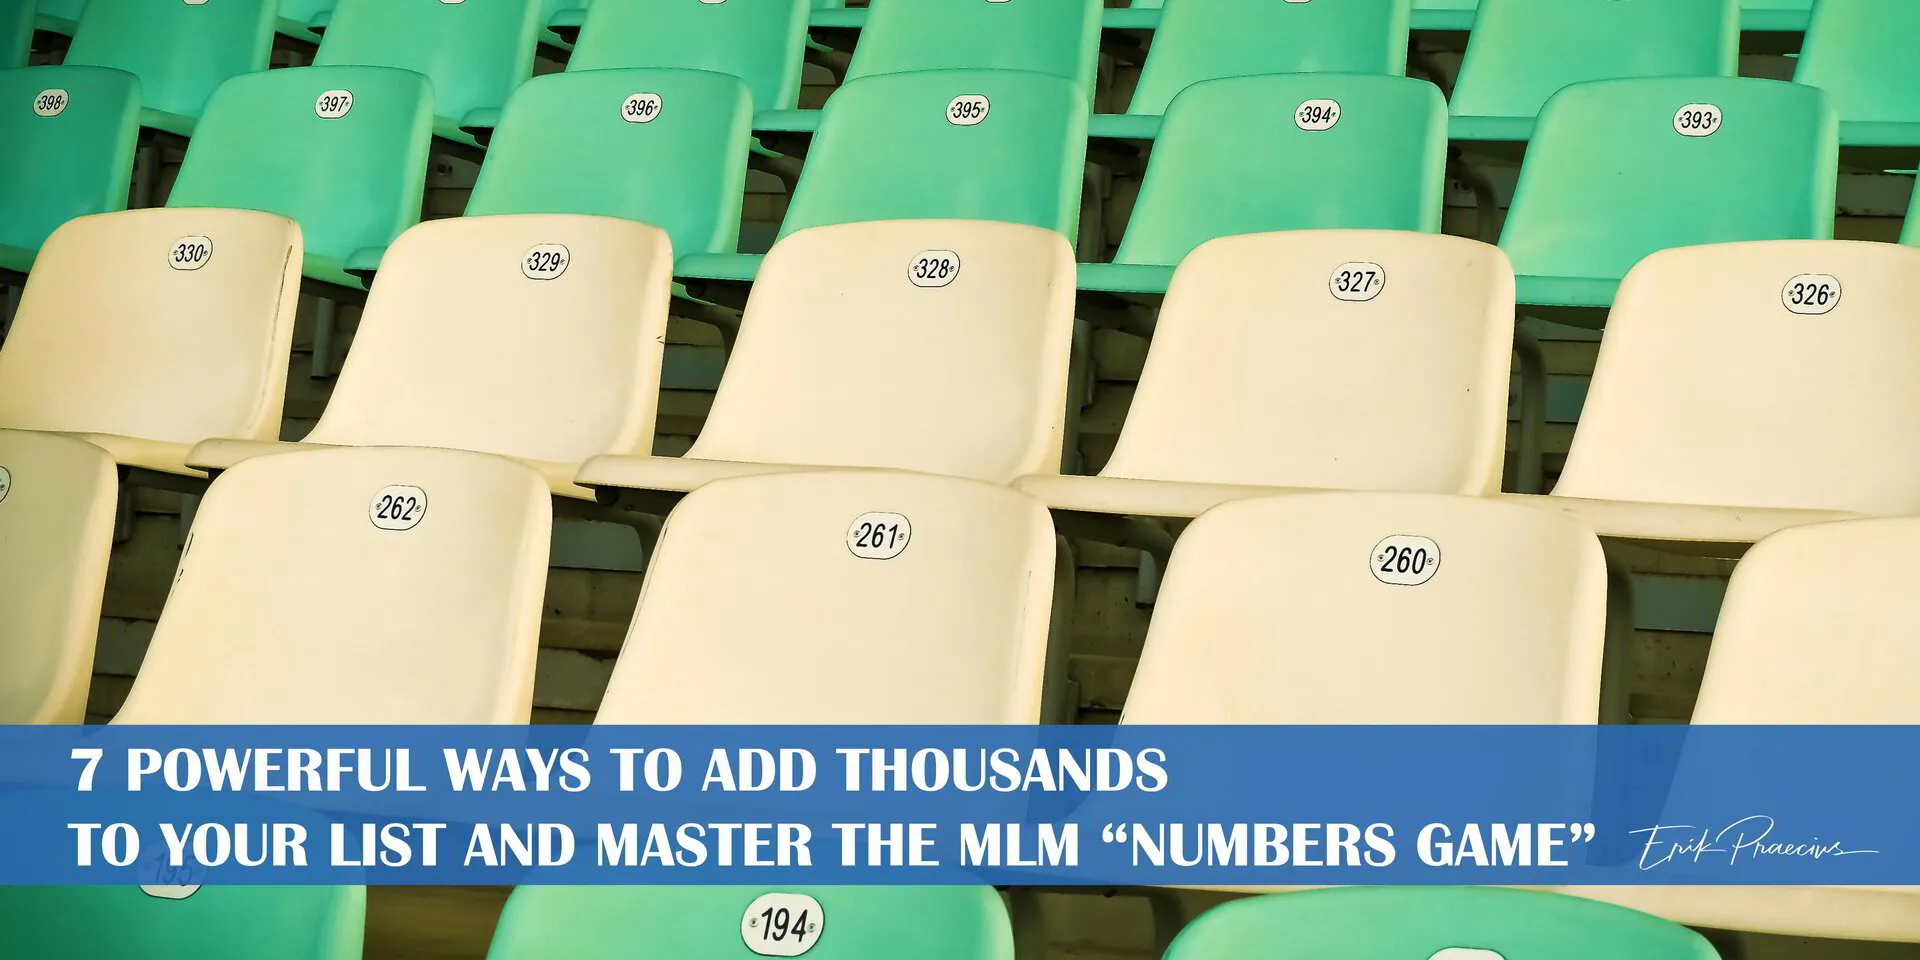 7 Powerful Ways to Add Thousands to Your List and Master the MLM “Numbers Game”